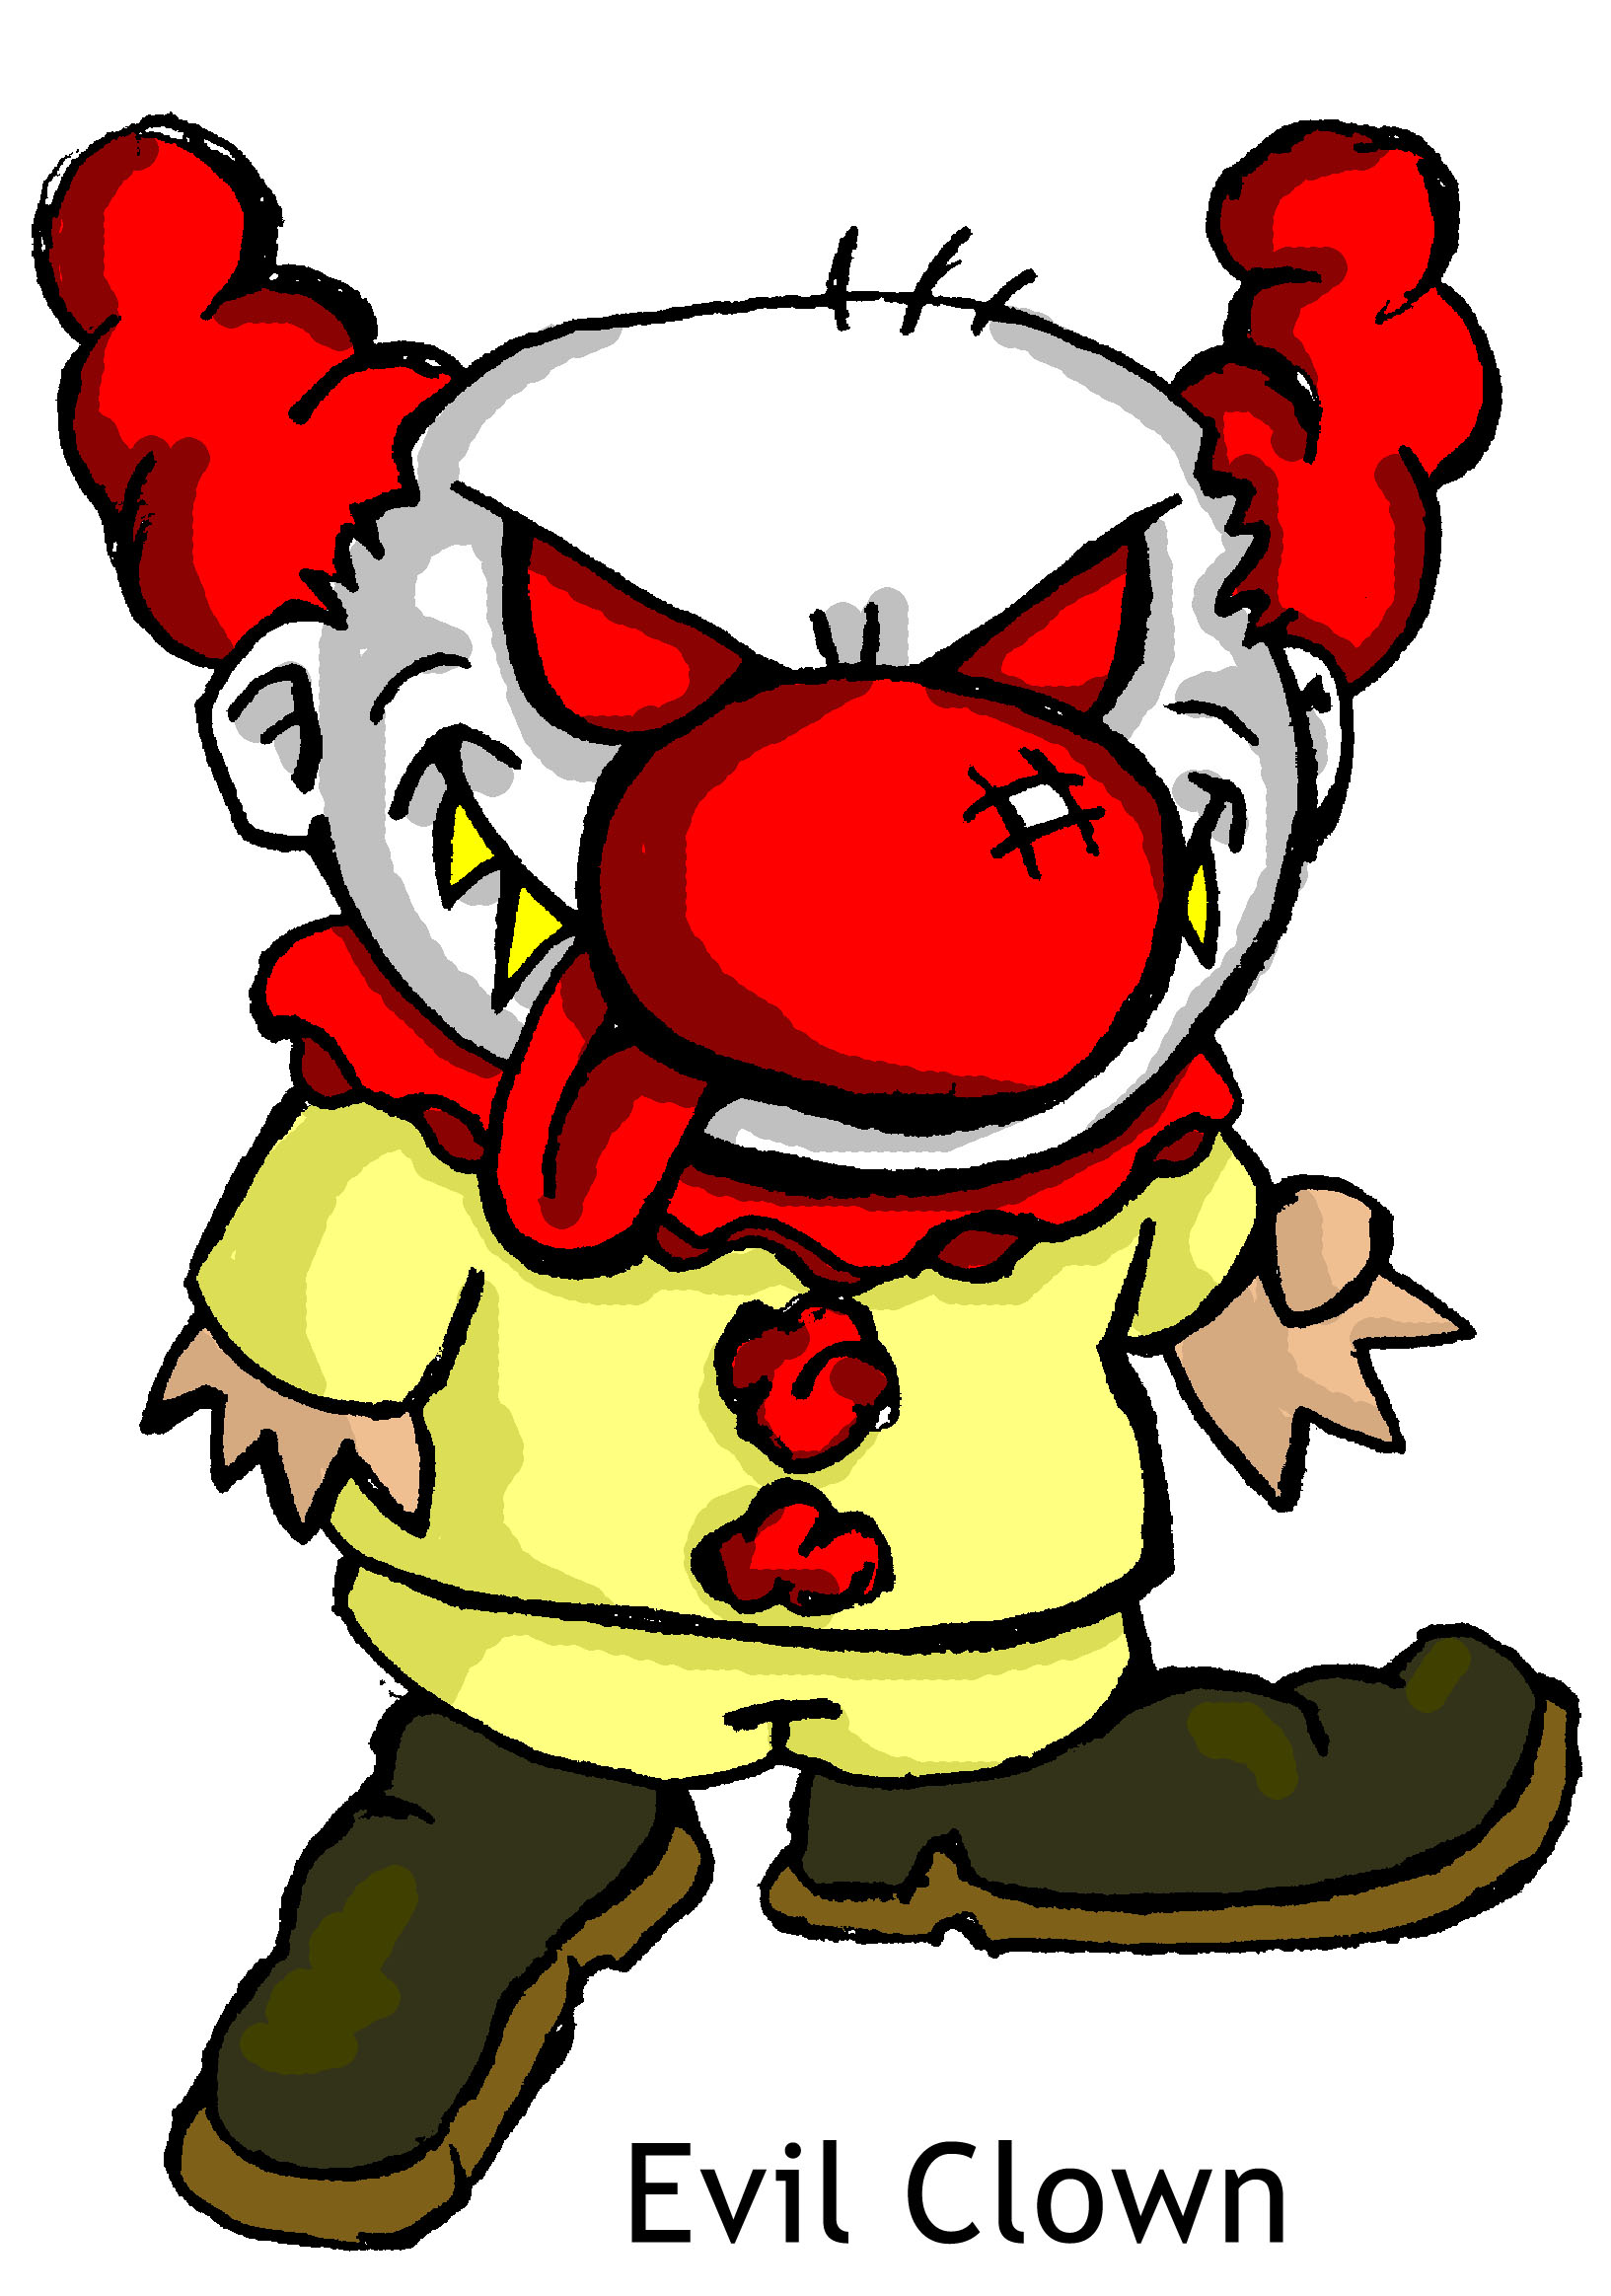 Evil Clown by happymonkeyshoes on Clipart library